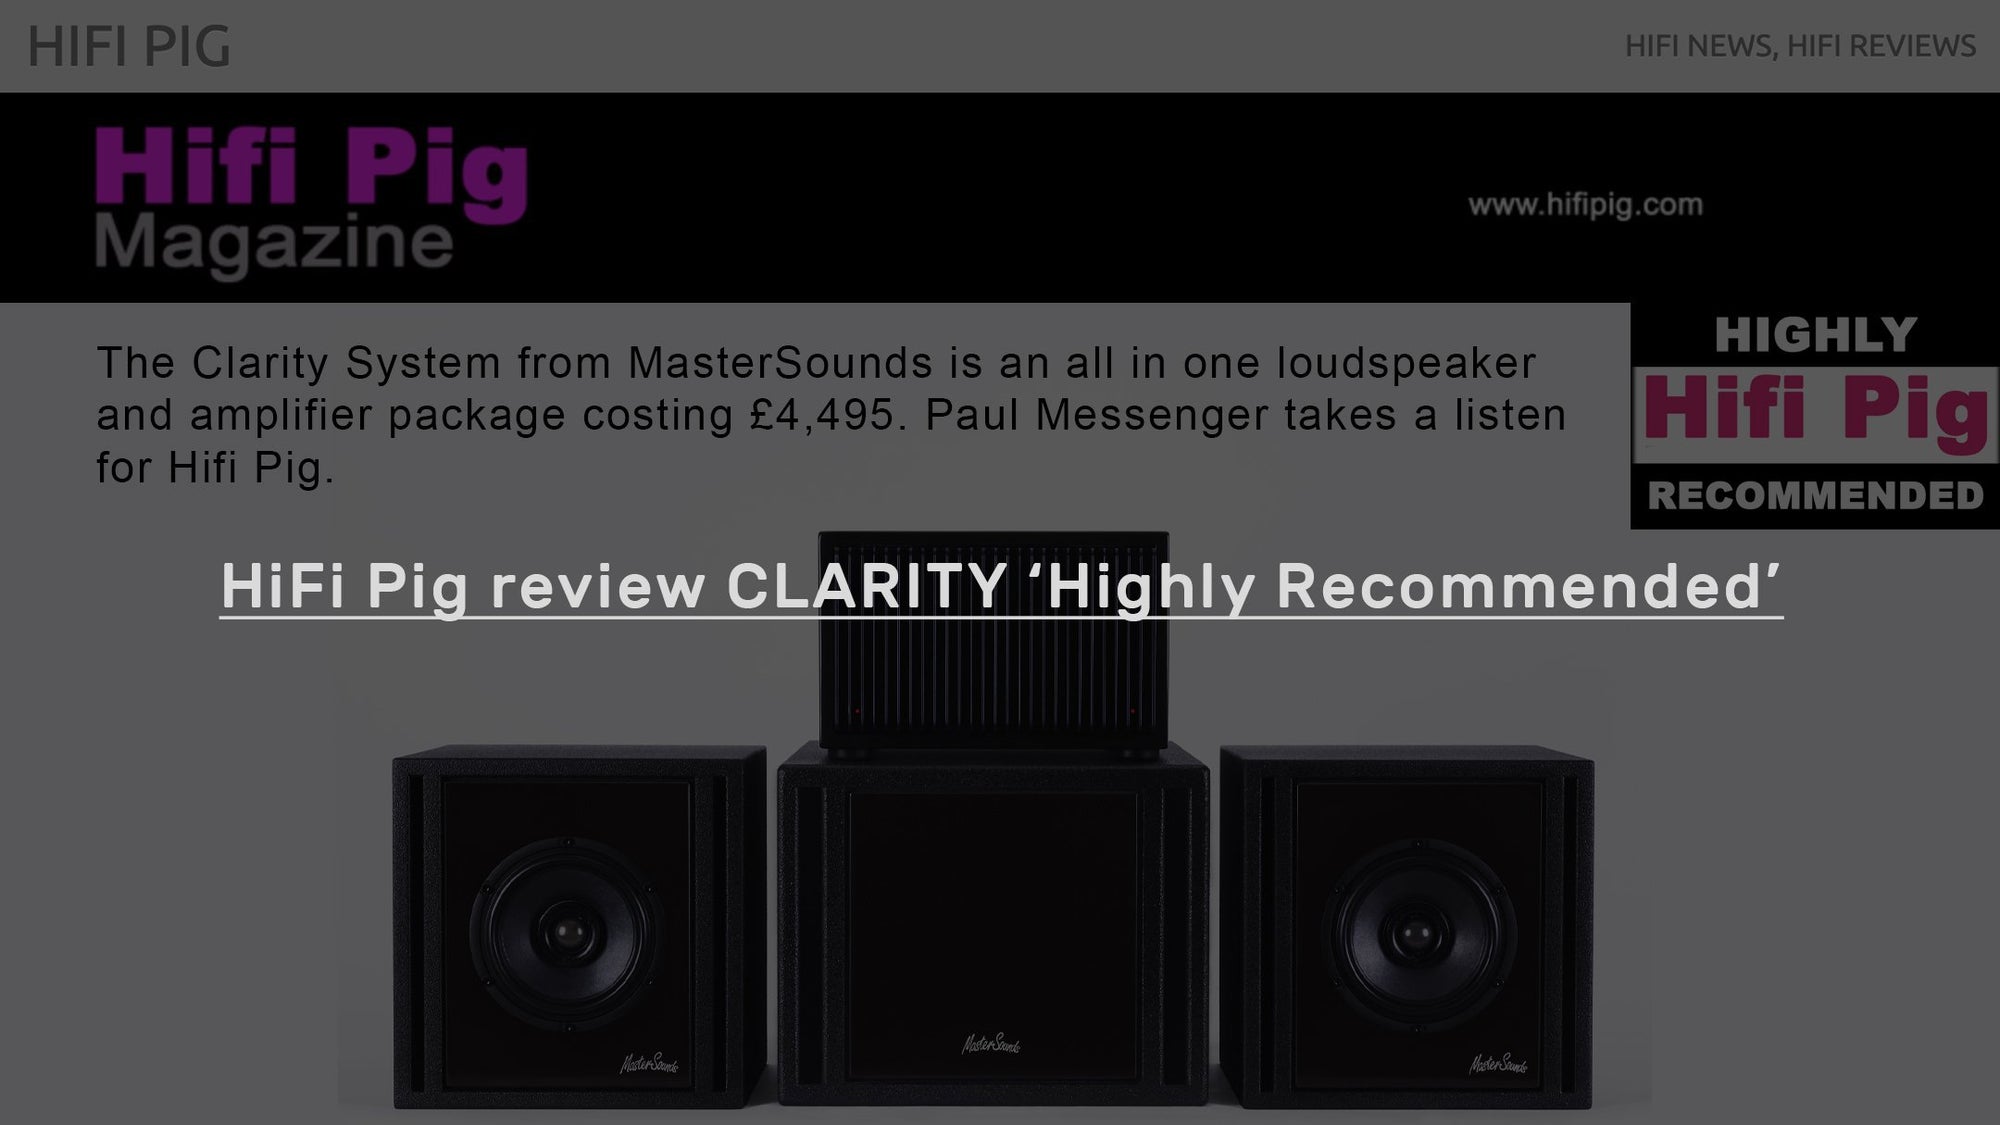 Hifi Pig Magazine conducted the first review of our CLARITY Audio System - MasterSounds